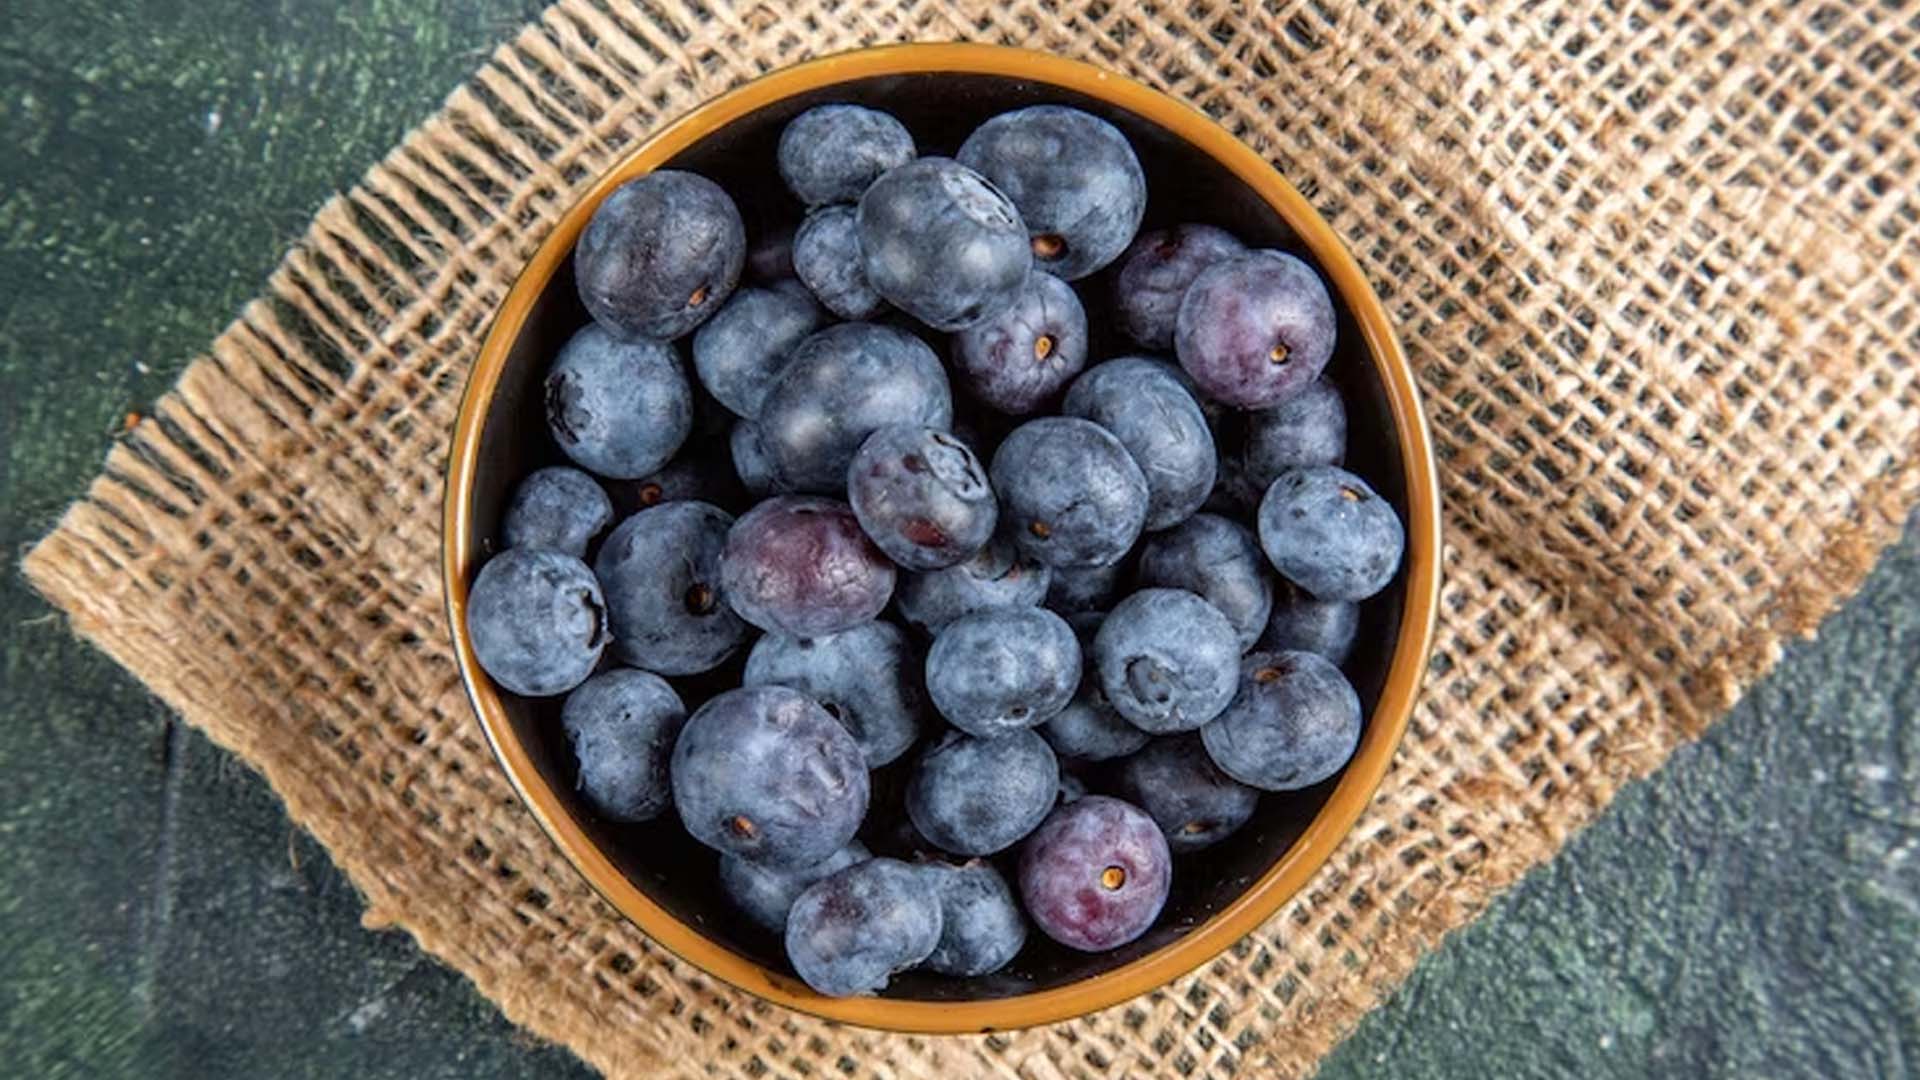 Nutritional Values of Blueberries